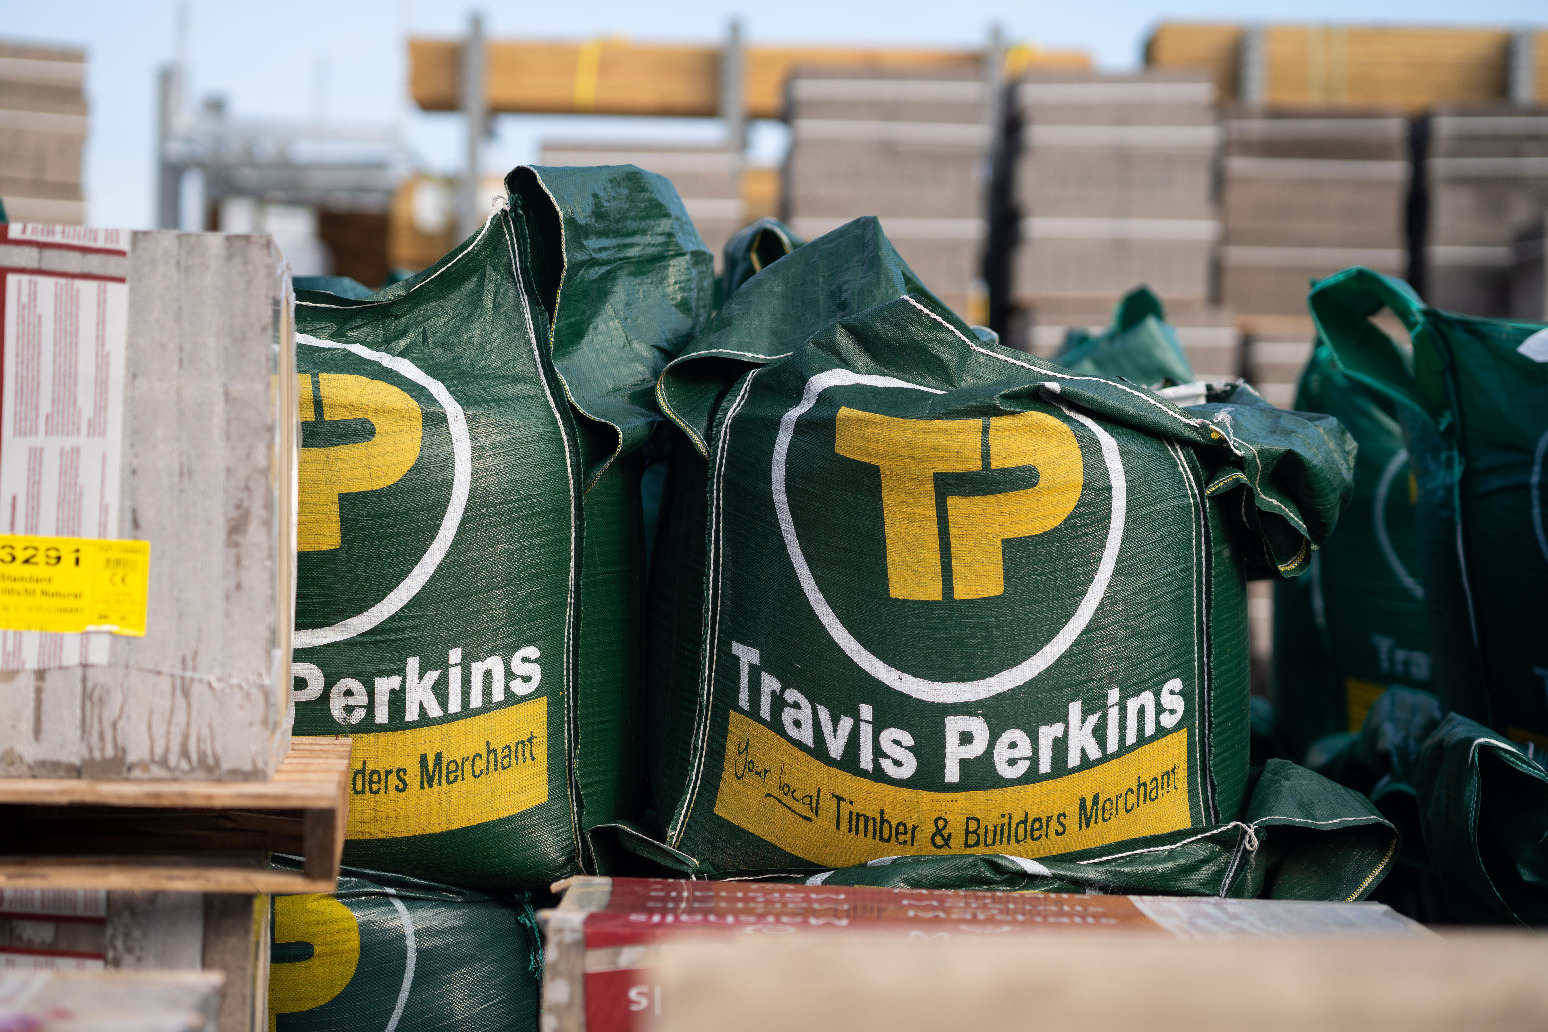 Travis Perkins sets out plan to train 10,000 apprentices 